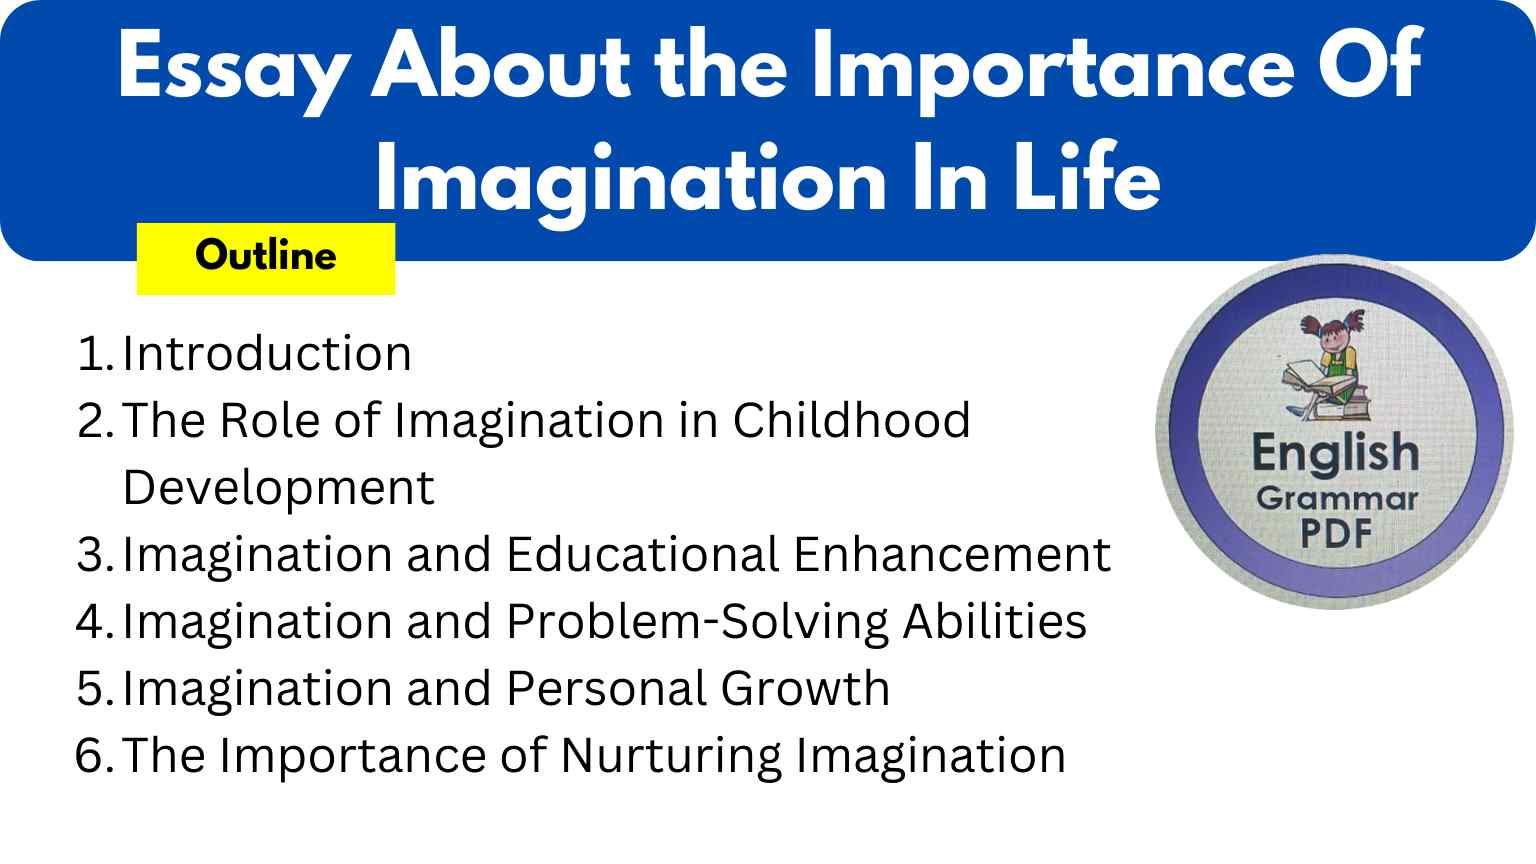 Essay About the Importance Of Imagination In Life